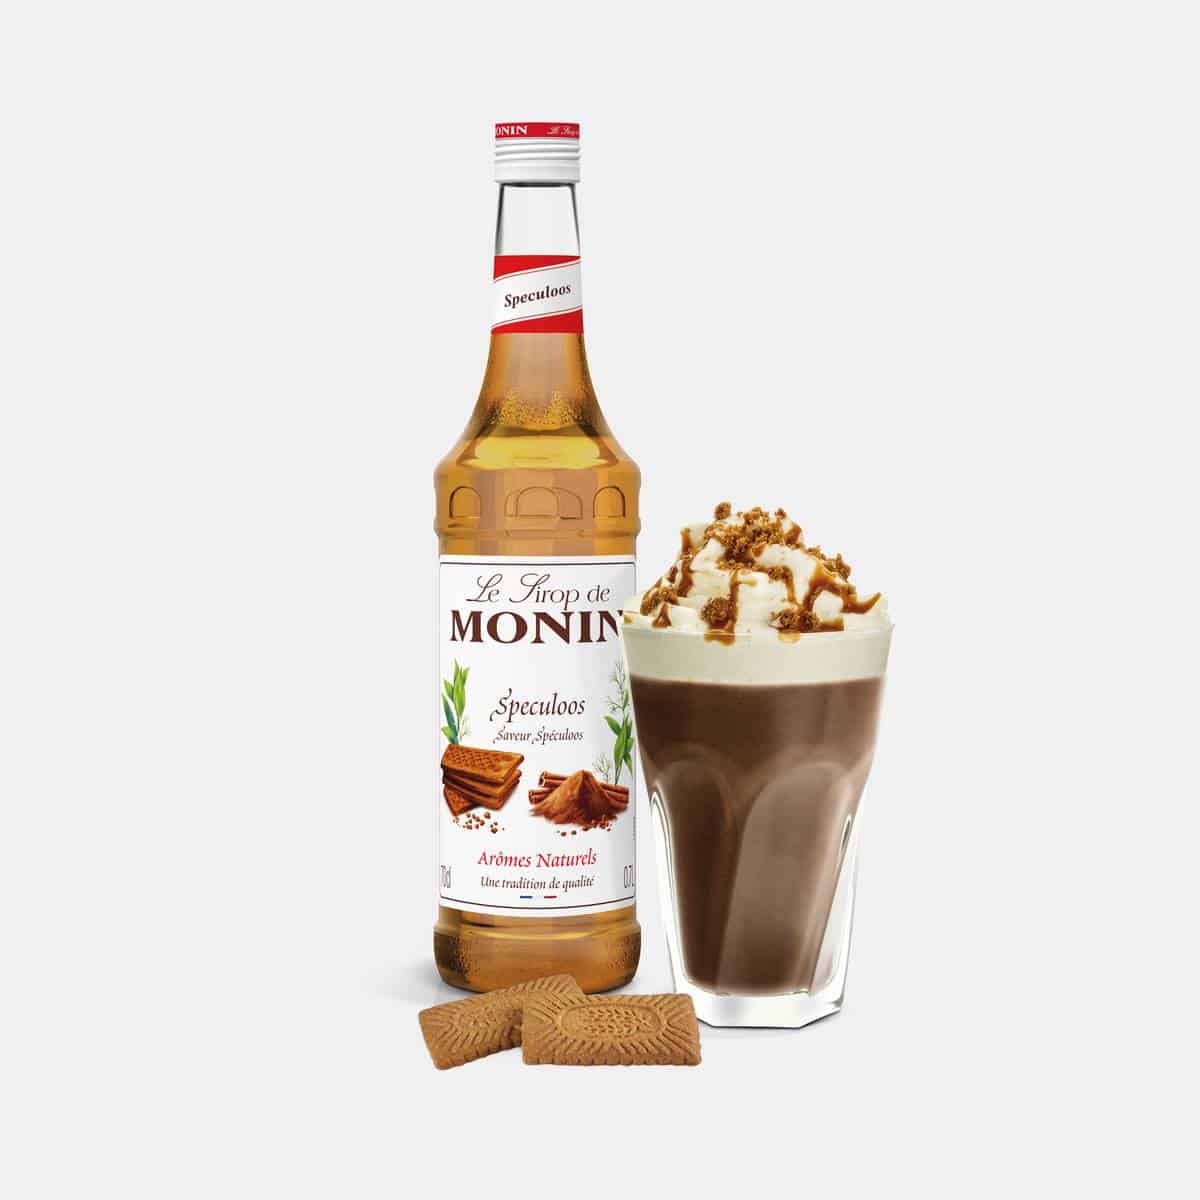 Monin Speculoos Syrup 700ml Glass Bottle with Drink